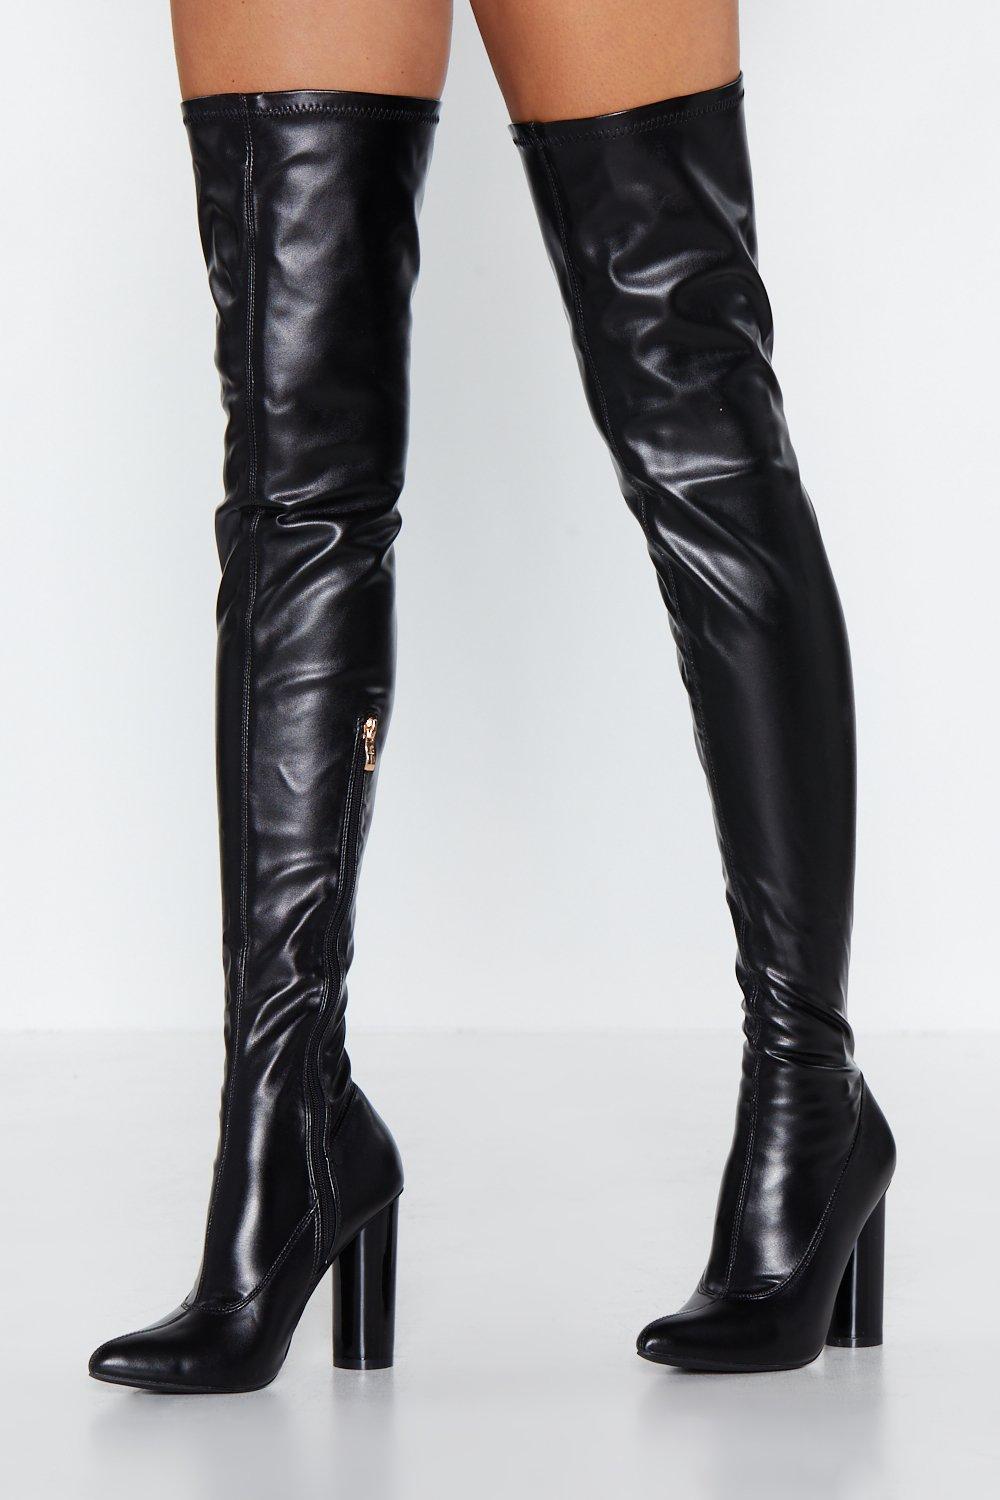 Cat Woman Forever Thigh-High Boot 